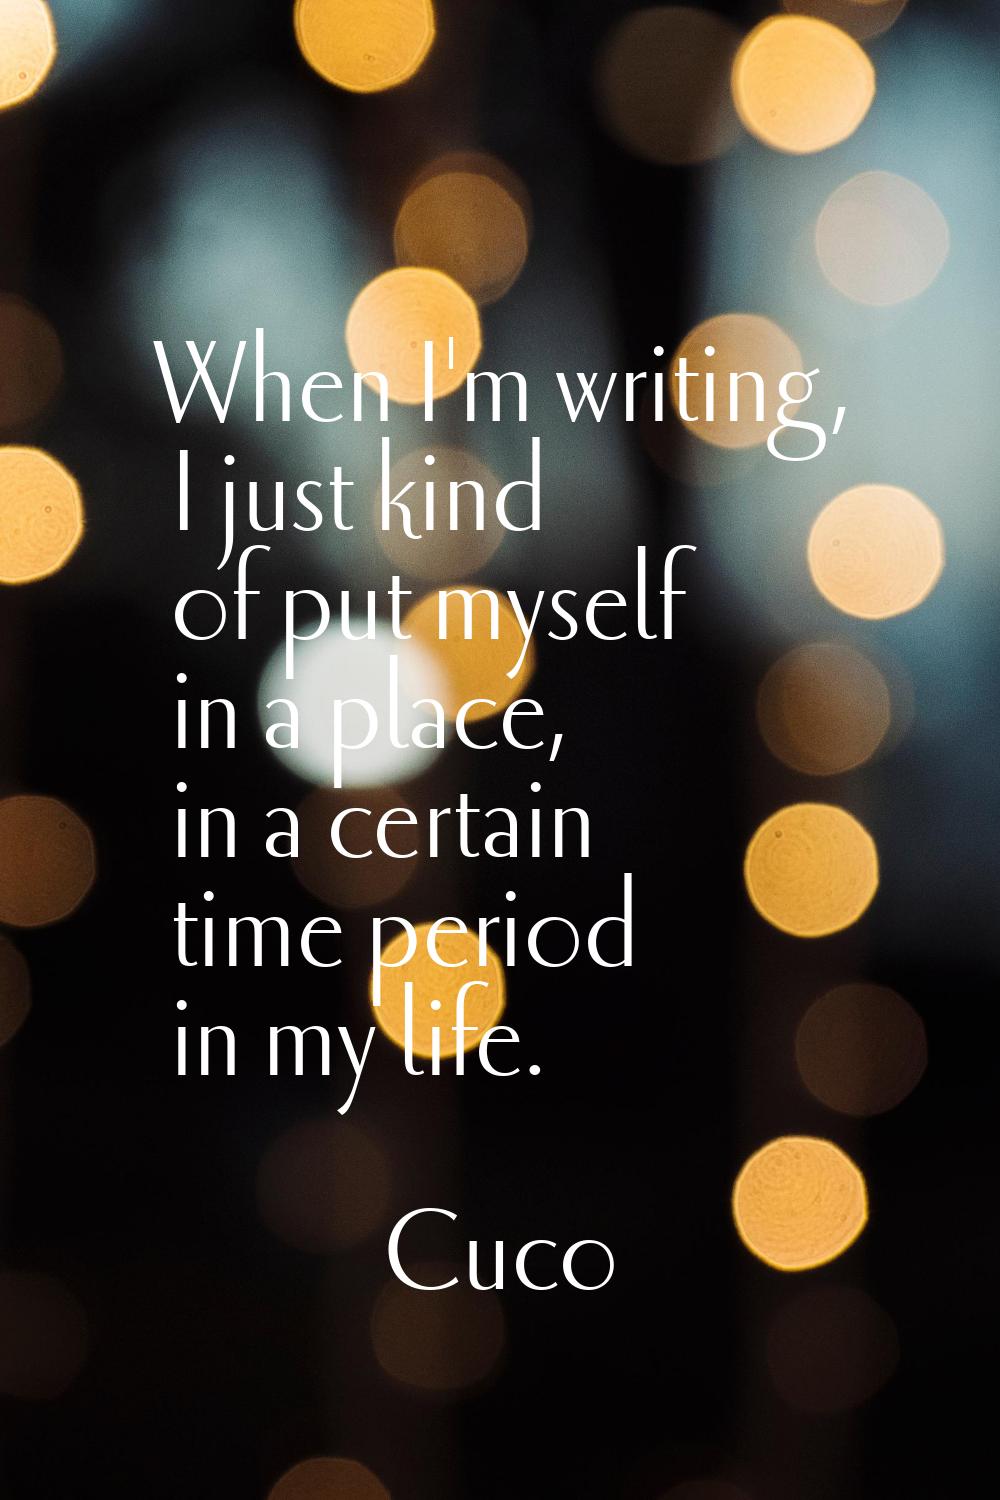 When I'm writing, I just kind of put myself in a place, in a certain time period in my life.